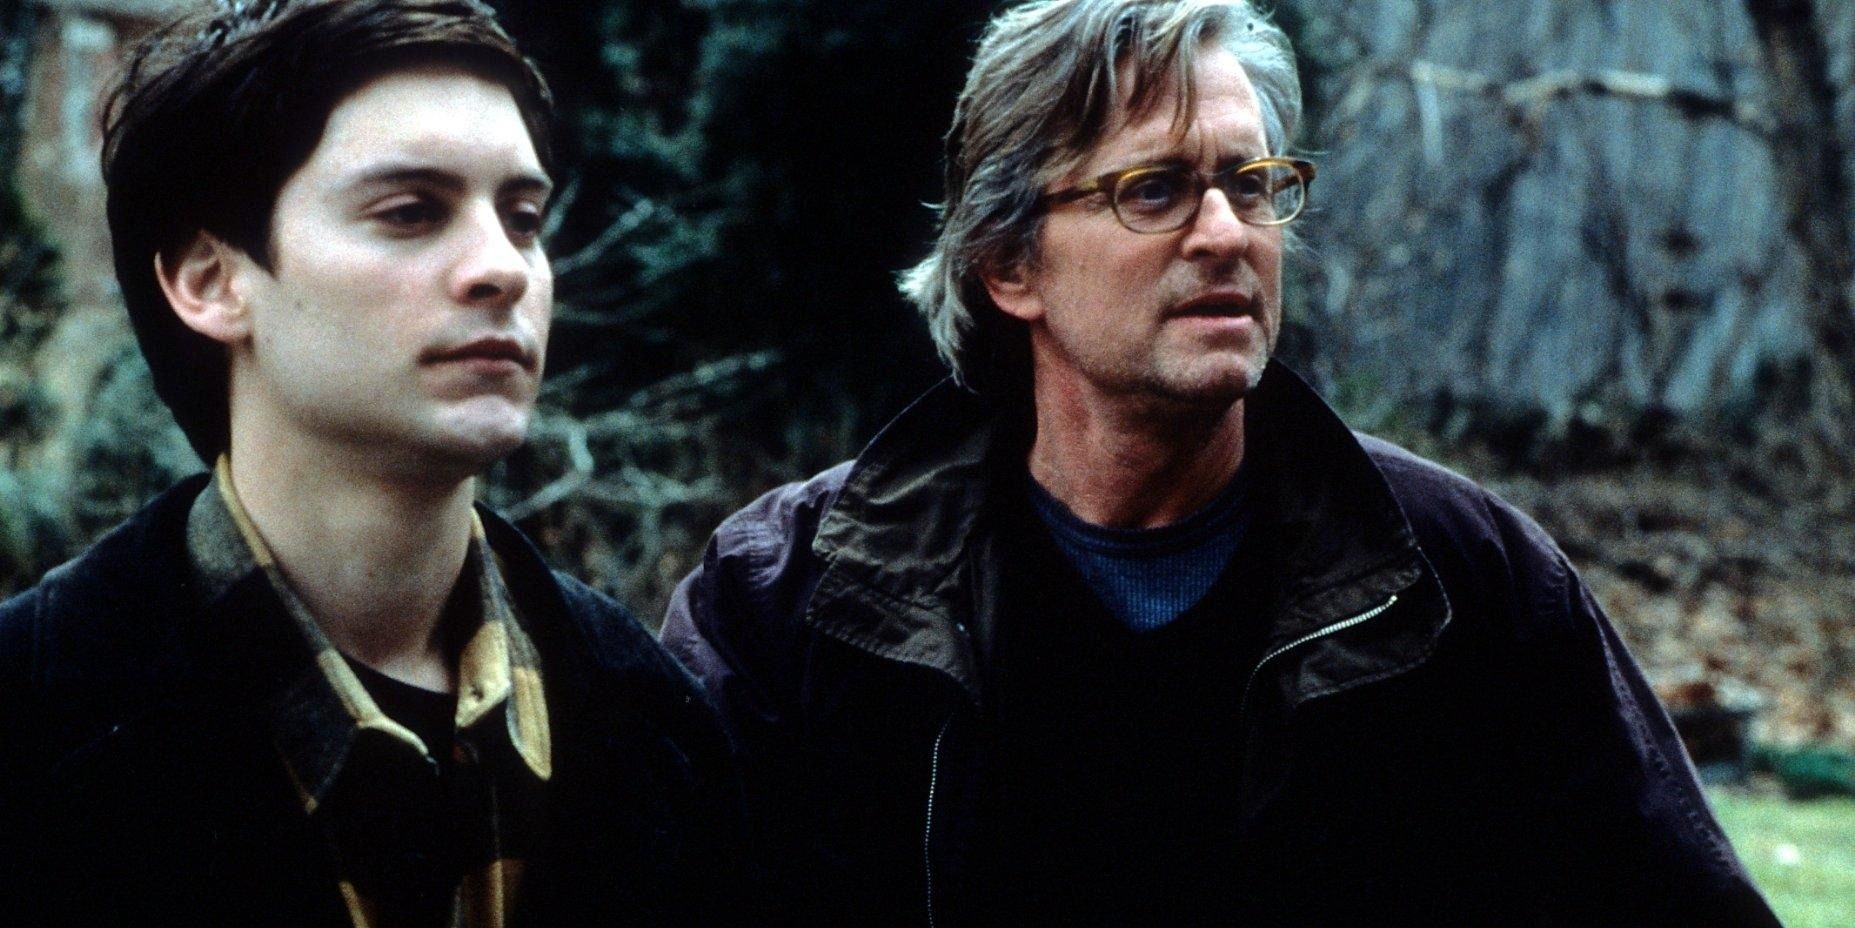 James and Professor Grady looking to the distance in Wonder Boys.